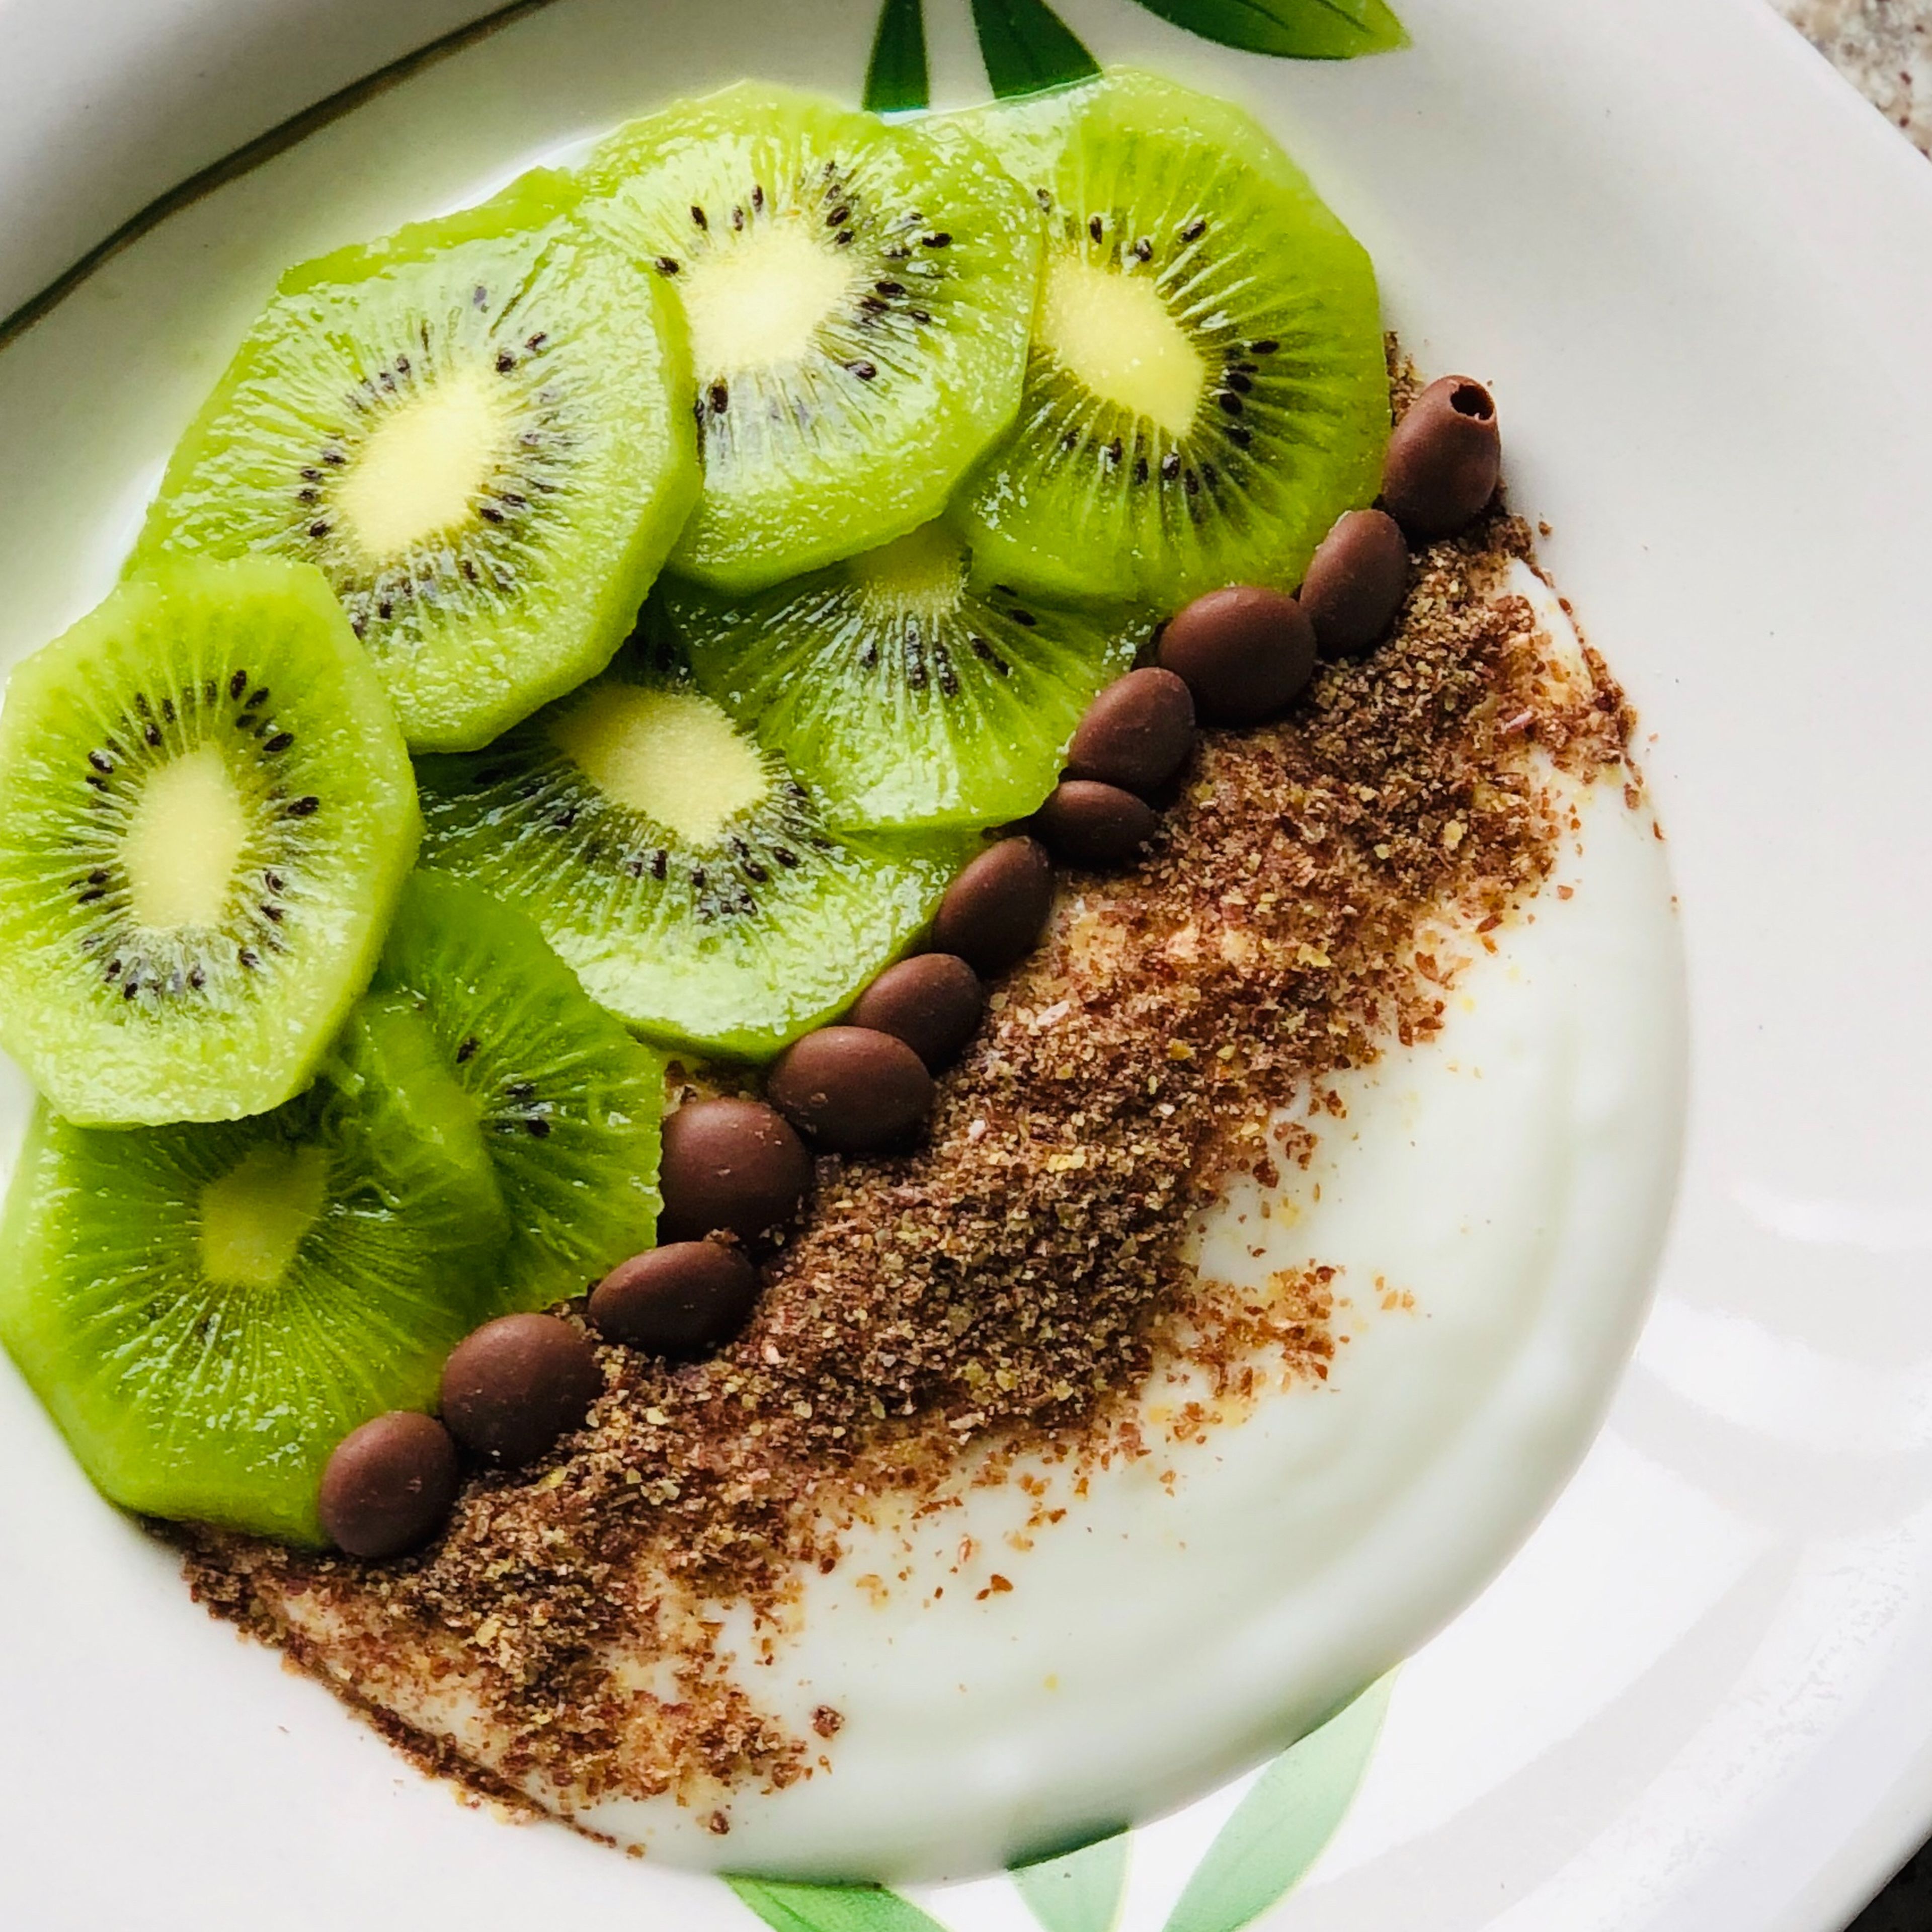 Put the yogurt in a bowl. Now peel the kiwi and cut it into slices. Distribute it on top of the yogurt on the side. Add the flax seeds. Place the chocolate chips and it's ready.